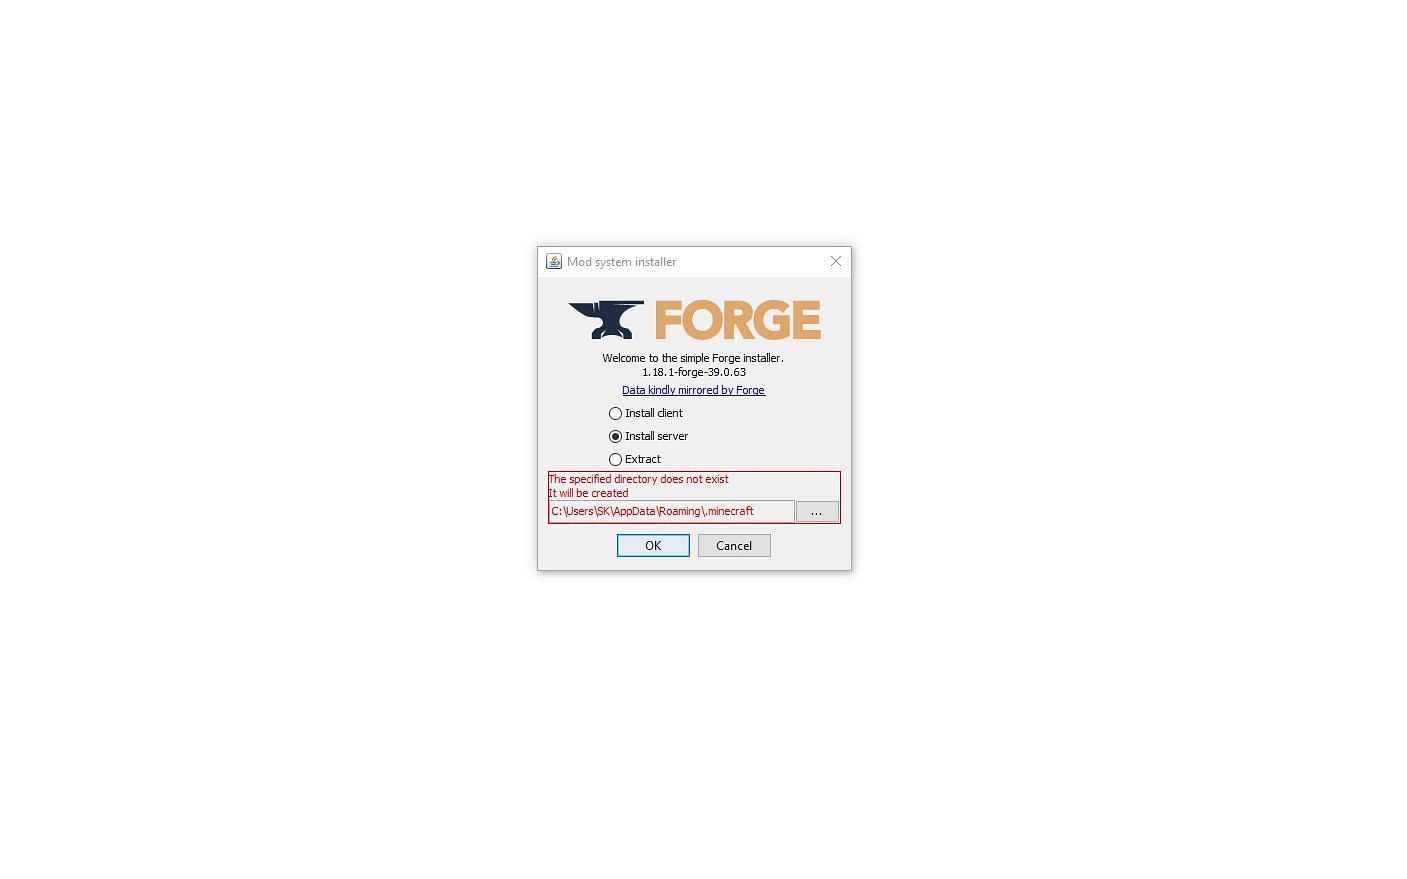 Players must select the install server option (Image via Forge Installer)